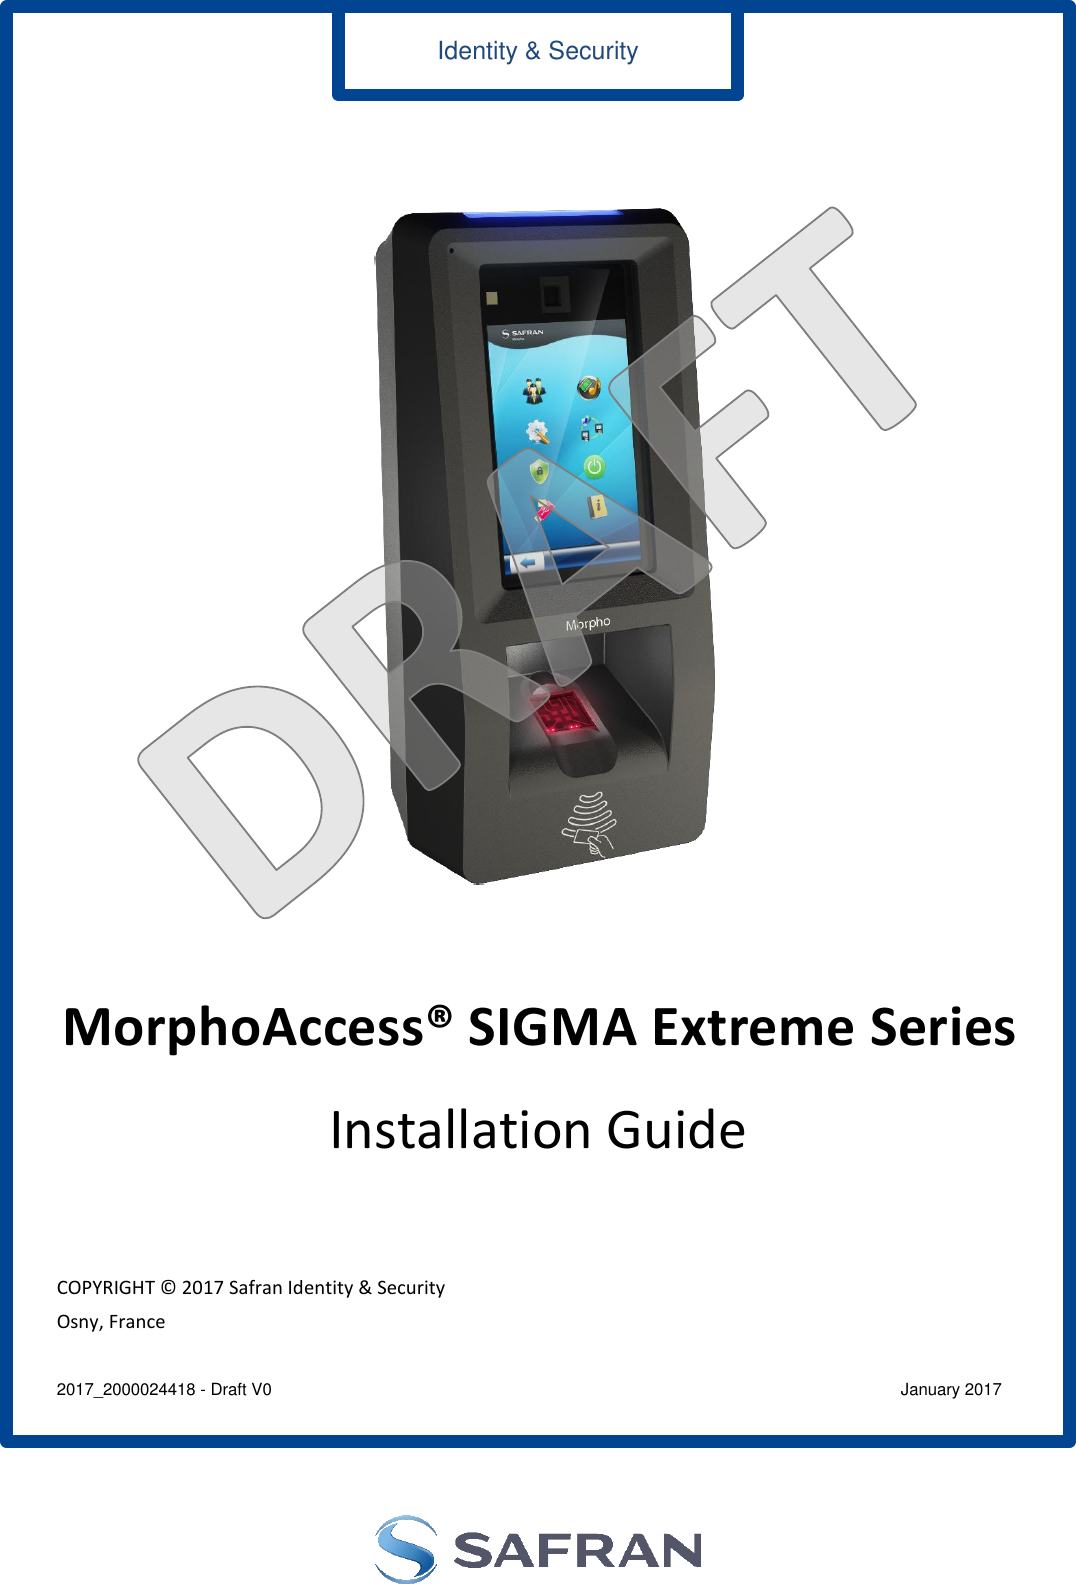          MorphoAccess® SIGMA Extreme Series Installation Guide    COPYRIGHT © 2017 Safran Identity &amp; Security Osny, France      2017_2000024418 - Draft V0    January 2017     Identity &amp; Security 